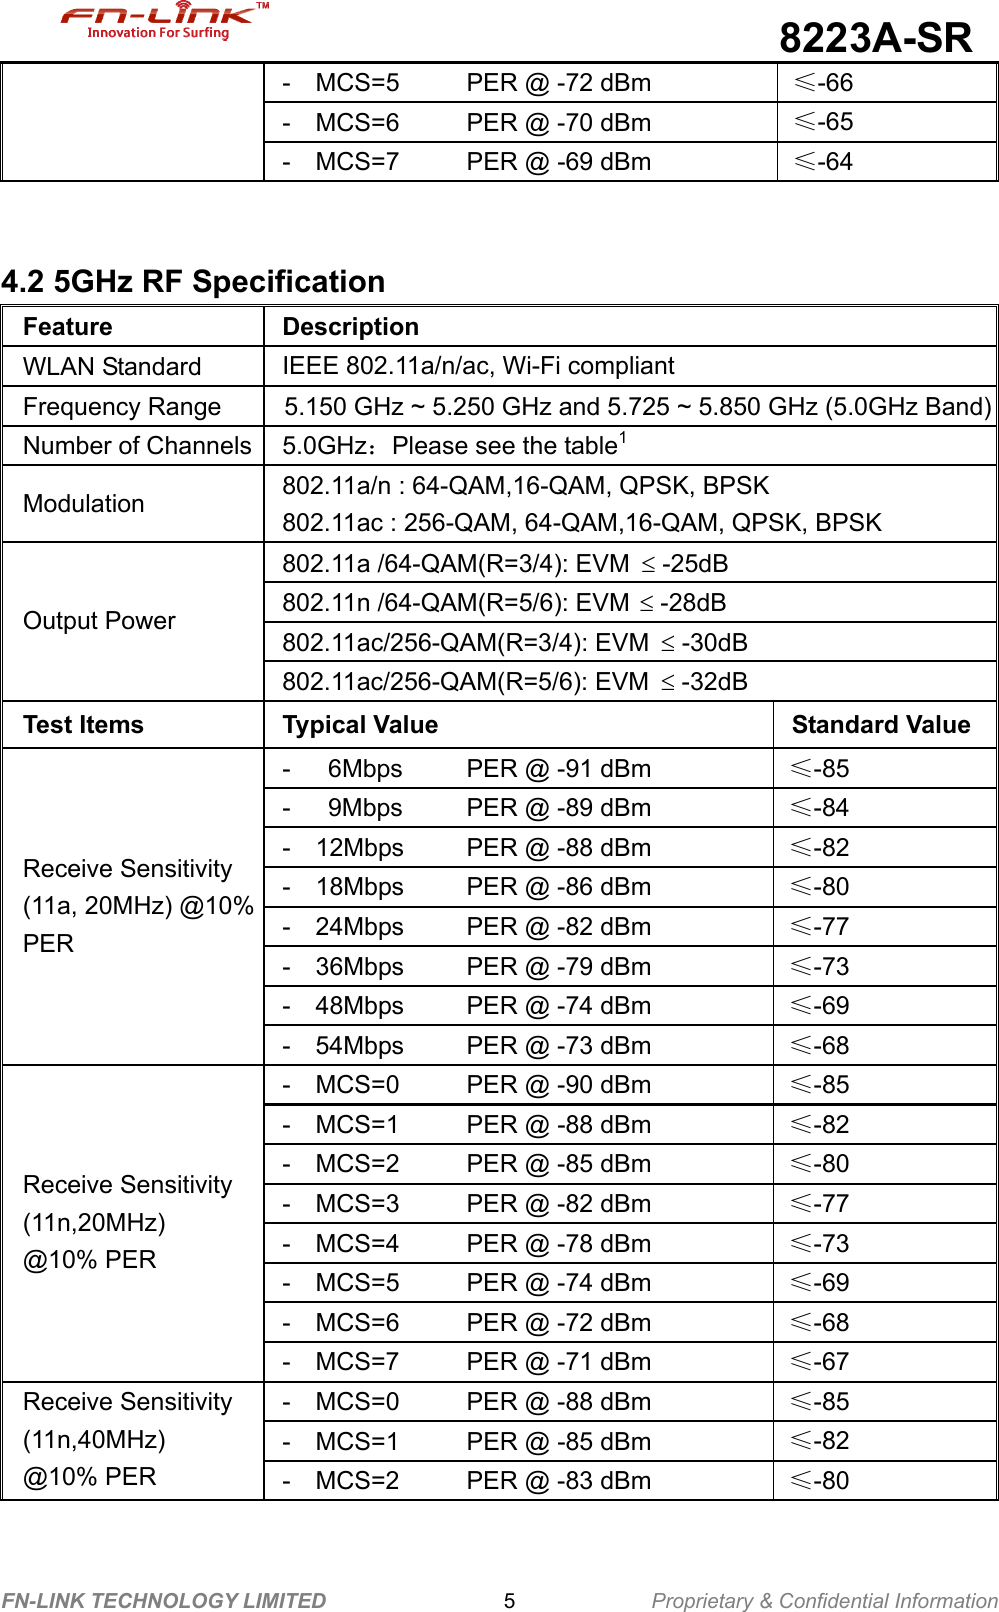                                             8223A-SR FN-LINK TECHNOLOGY LIMITED                 5             Proprietary &amp; Confidential Information -    MCS=5    PER @ -72 dBm  ≤-66 -    MCS=6    PER @ -70 dBm  ≤-65 -    MCS=7      PER @ -69 dBm  ≤-64   4.2 5GHz RF Specification Feature Description WLAN Standard  IEEE 802.11a/n/ac, Wi-Fi compliant Frequency Range    5.150 GHz ~ 5.250 GHz and 5.725 ~ 5.850 GHz (5.0GHz Band) Number of Channels 5.0GHz：Please see the table1 Modulation  802.11a/n : 64-QAM,16-QAM, QPSK, BPSK   802.11ac : 256-QAM, 64-QAM,16-QAM, QPSK, BPSK 802.11a /64-QAM(R=3/4): EVM  ≤ -25dB 802.11n /64-QAM(R=5/6): EVM  ≤ -28dB 802.11ac/256-QAM(R=3/4): EVM  ≤ -30dB   Output Power 802.11ac/256-QAM(R=5/6): EVM  ≤ -32dB   Test Items Typical Value Standard Value -      6Mbps    PER @ -91 dBm  ≤-85 -   9Mbps    PER @ -89 dBm  ≤-84 -    12Mbps    PER @ -88 dBm  ≤-82 -    18Mbps    PER @ -86 dBm  ≤-80 -    24Mbps    PER @ -82 dBm  ≤-77 -    36Mbps    PER @ -79 dBm  ≤-73 -    48Mbps    PER @ -74 dBm  ≤-69 Receive Sensitivity (11a, 20MHz) @10% PER -    54Mbps    PER @ -73 dBm  ≤-68 -    MCS=0    PER @ -90 dBm  ≤-85 -    MCS=1      PER @ -88 dBm  ≤-82 -    MCS=2    PER @ -85 dBm  ≤-80 -    MCS=3    PER @ -82 dBm  ≤-77 -    MCS=4    PER @ -78 dBm  ≤-73 -    MCS=5    PER @ -74 dBm  ≤-69 -    MCS=6    PER @ -72 dBm  ≤-68 Receive Sensitivity (11n,20MHz)  @10% PER -    MCS=7      PER @ -71 dBm  ≤-67 -    MCS=0    PER @ -88 dBm  ≤-85 -    MCS=1      PER @ -85 dBm  ≤-82 Receive Sensitivity (11n,40MHz)  @10% PER  -    MCS=2    PER @ -83 dBm  ≤-80       